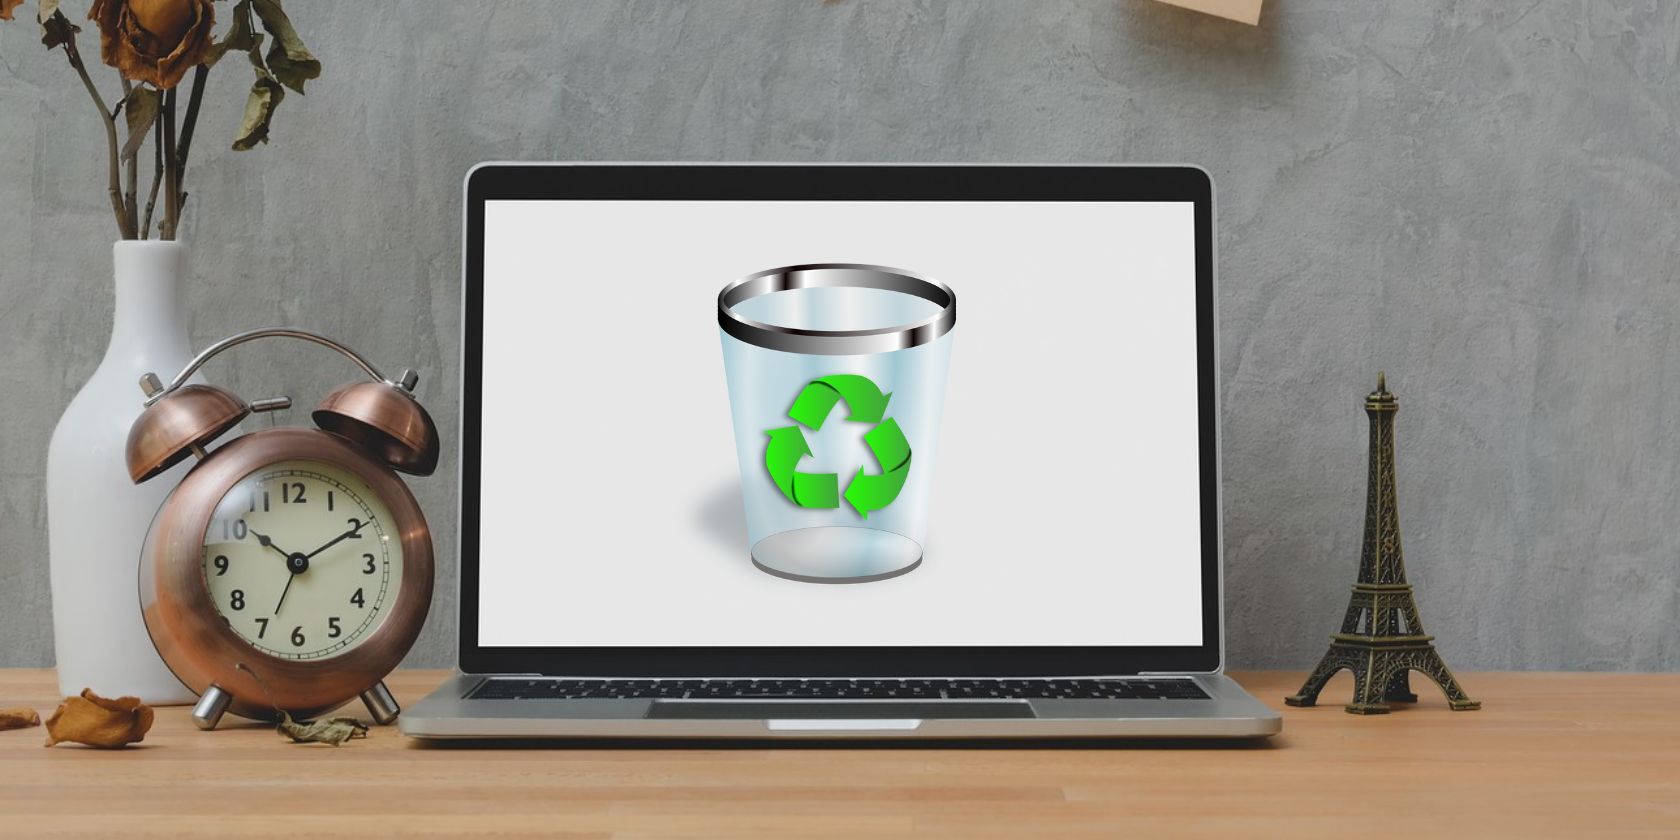 A laptop on a table showing recycle bin logo